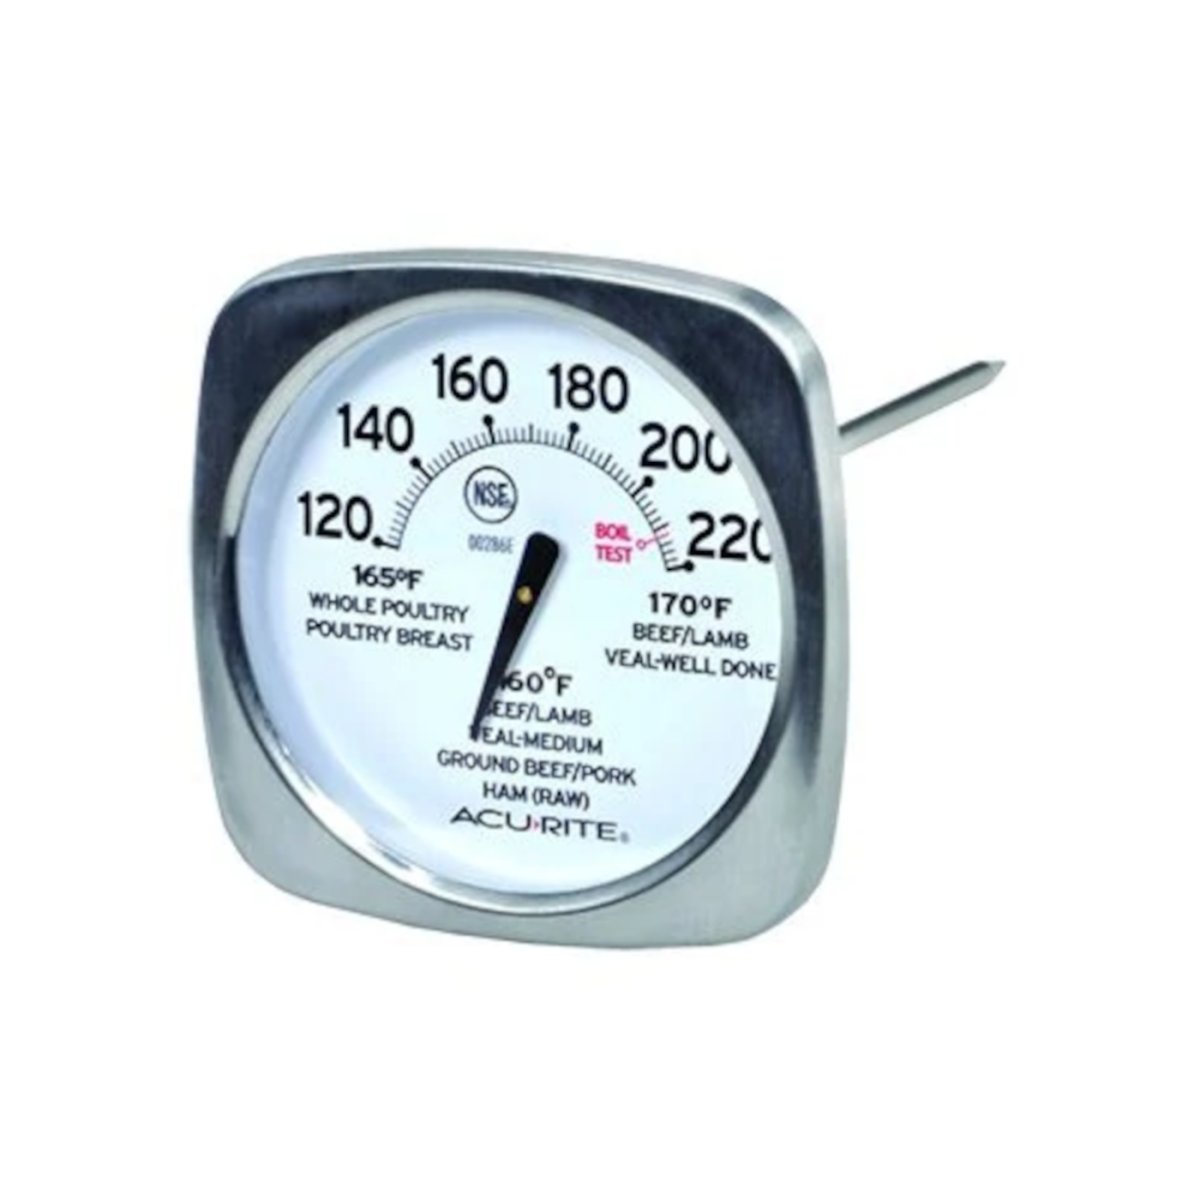 Acurite Gourmet Oven Thermometer